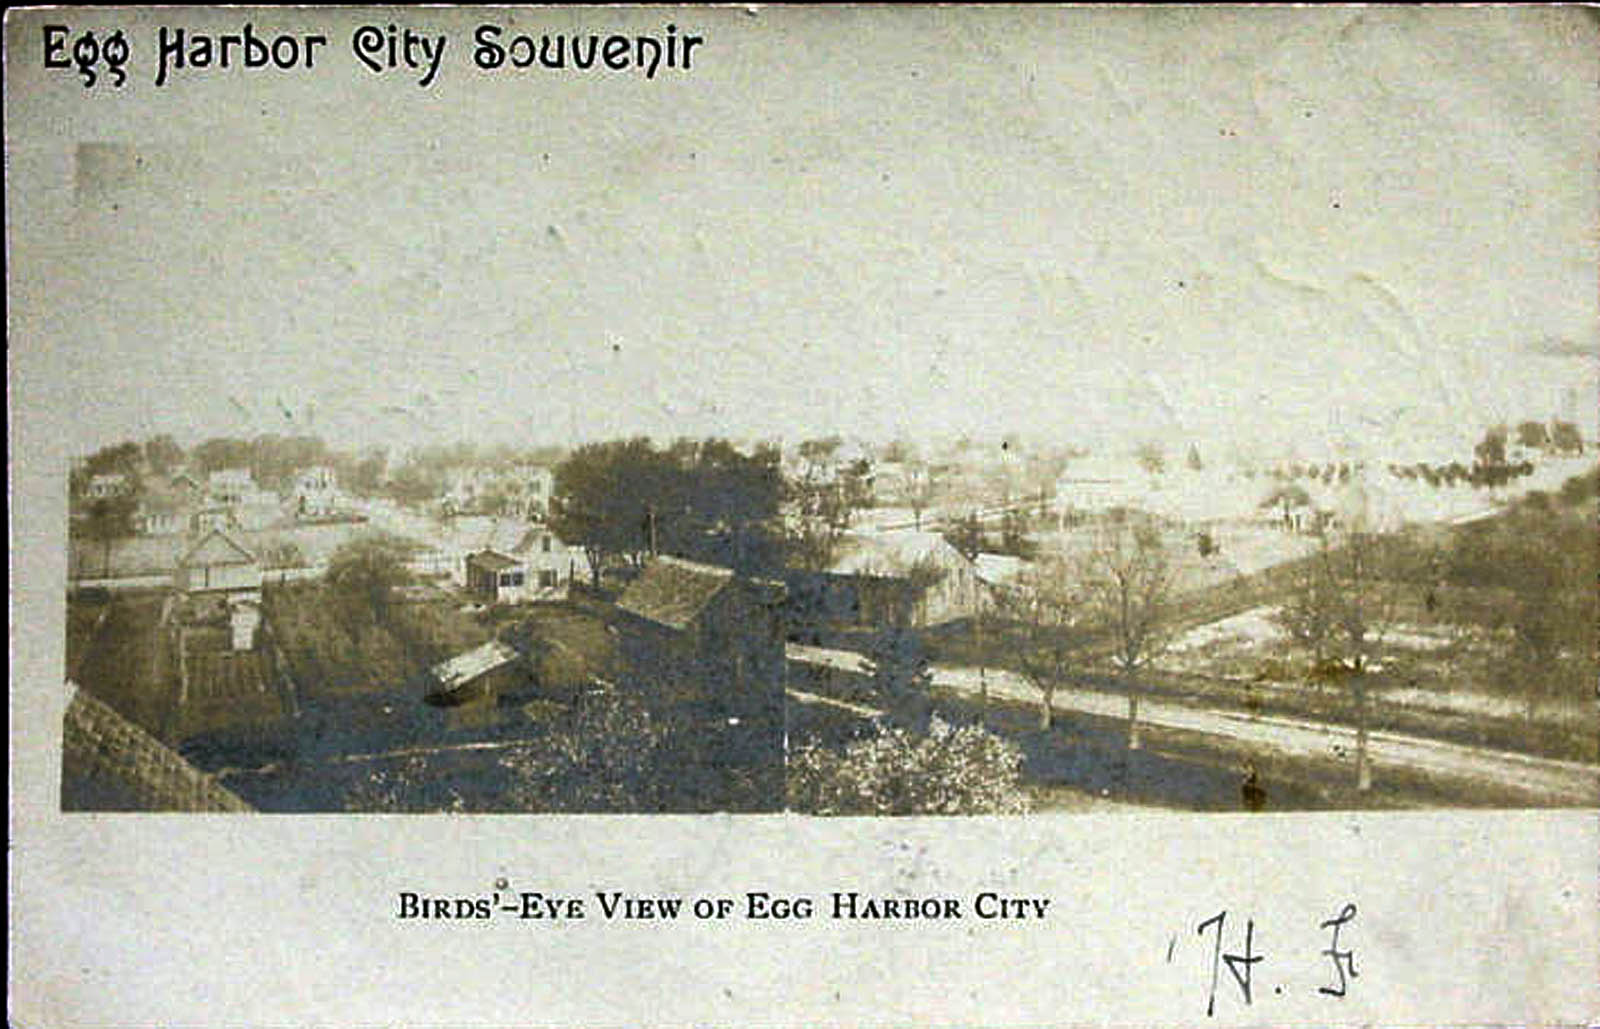 Egg Harbor City - Birds eye view of part of the town - 1905